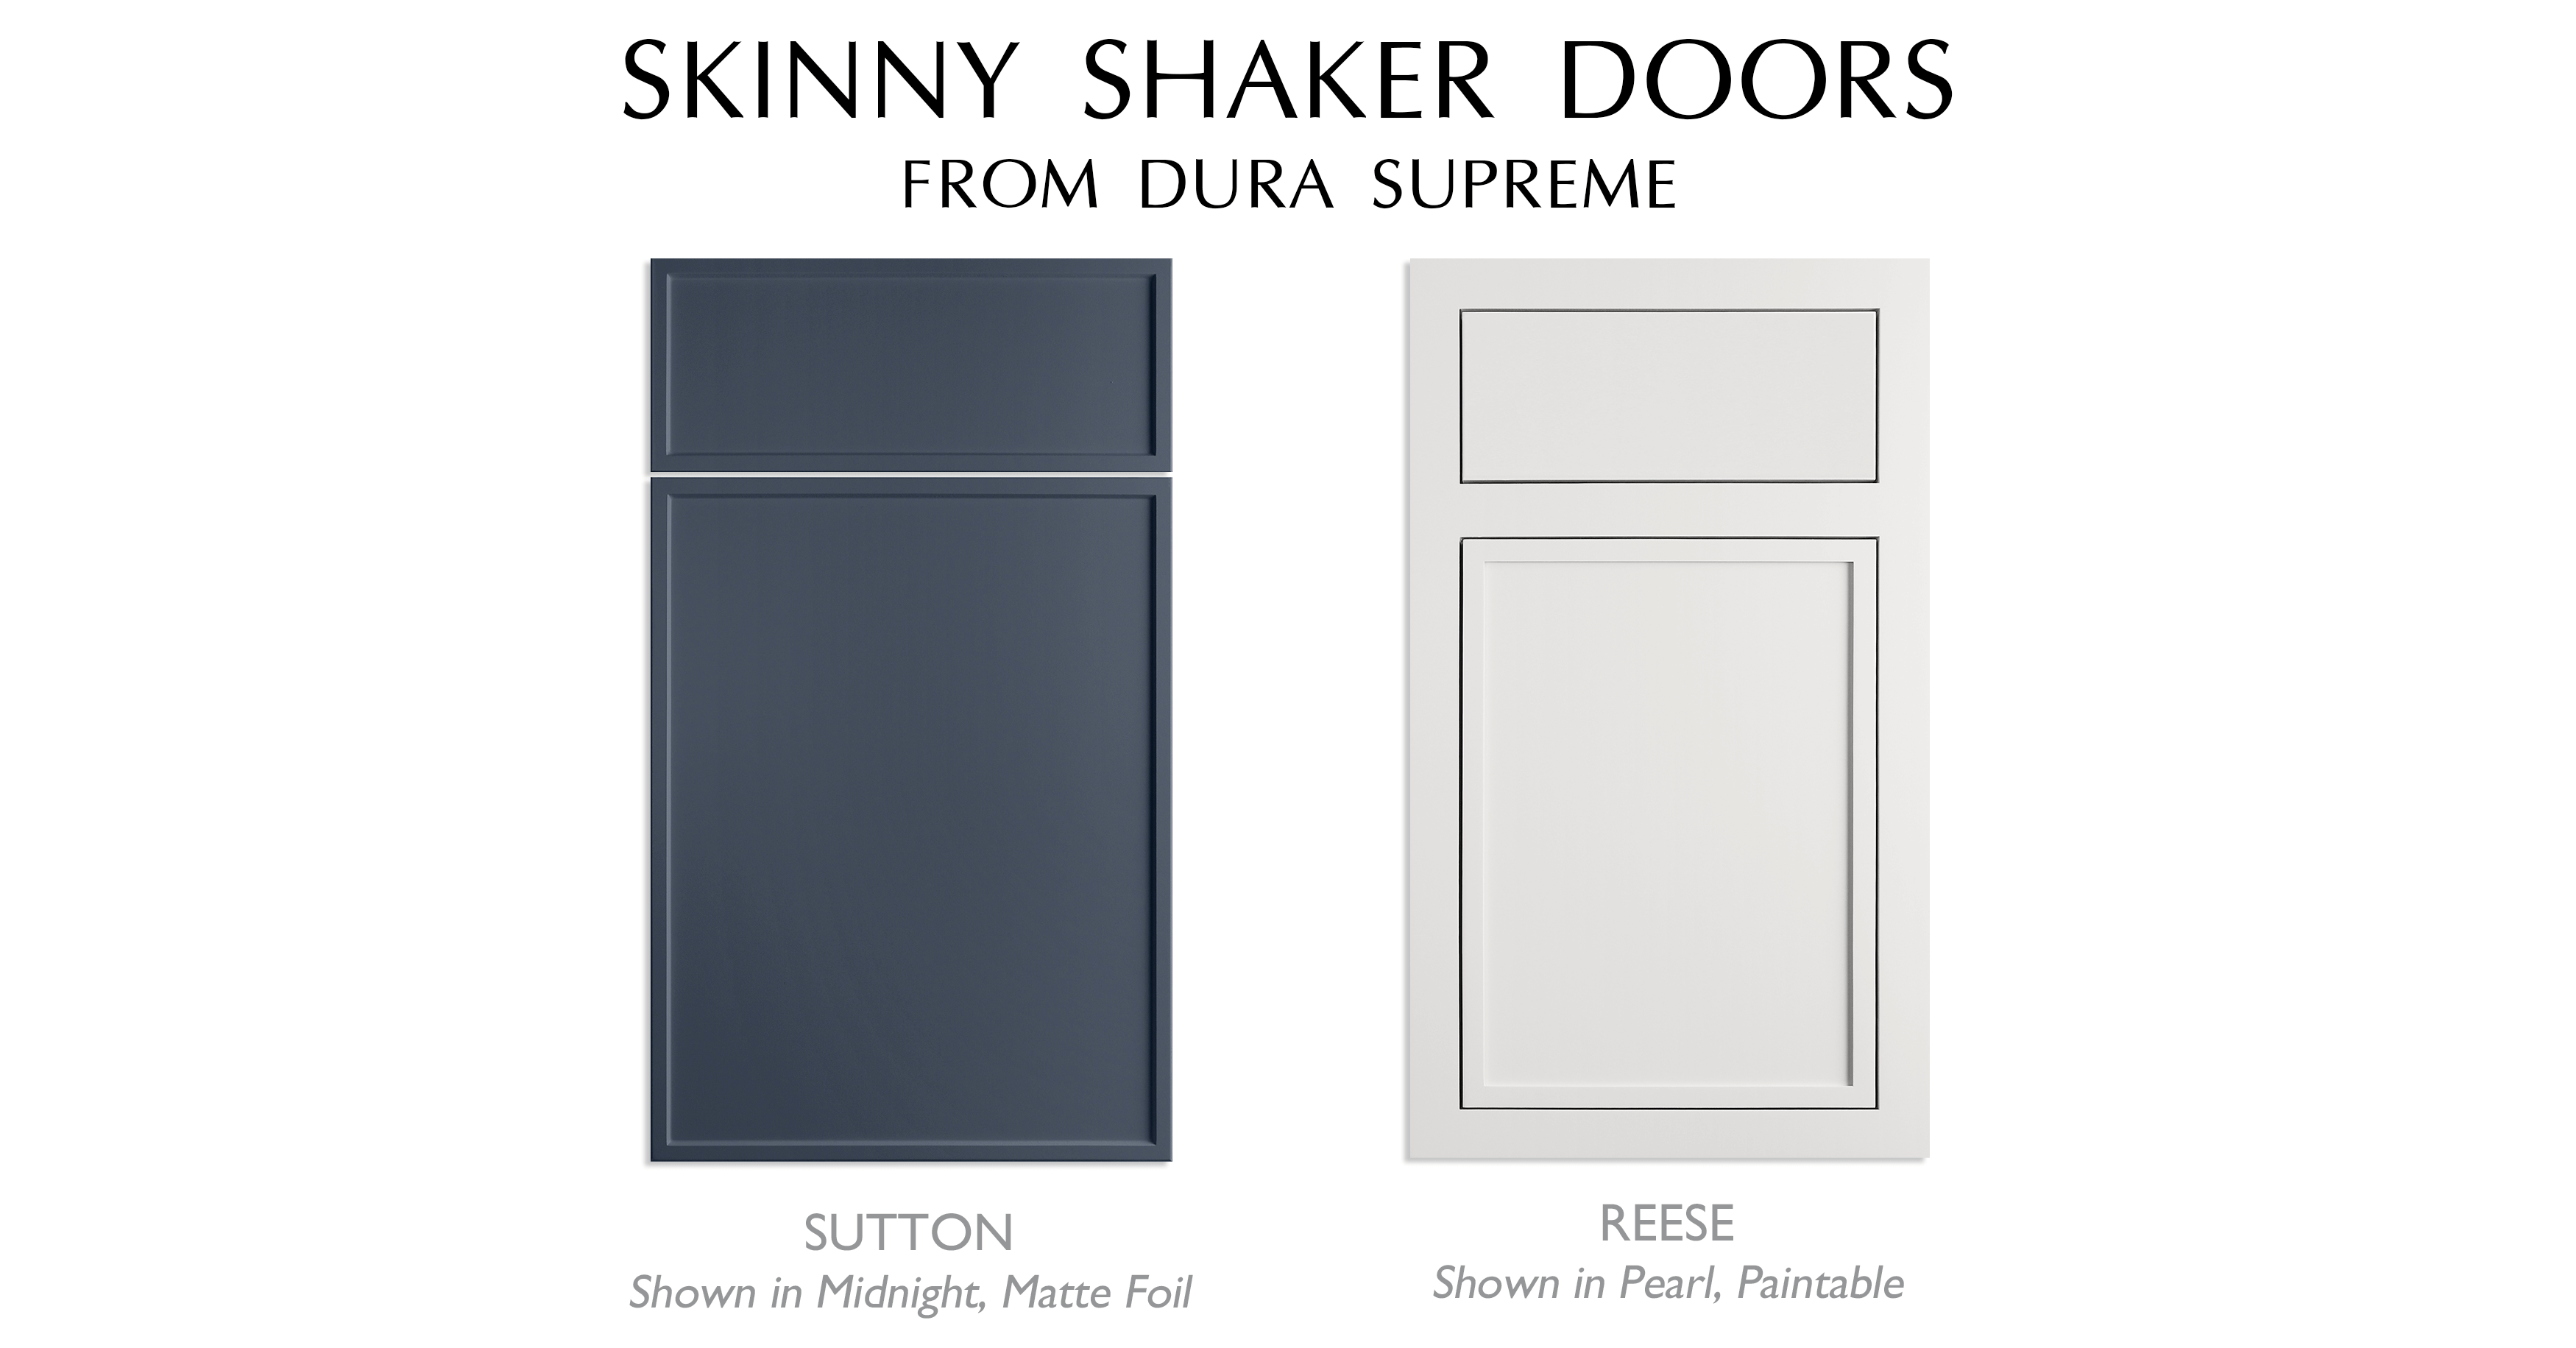 An example of two modern shaker cabinet door styes with thin, skinny rails and stiles and a solid flat center panel from Dura Supreme Cabinetry.